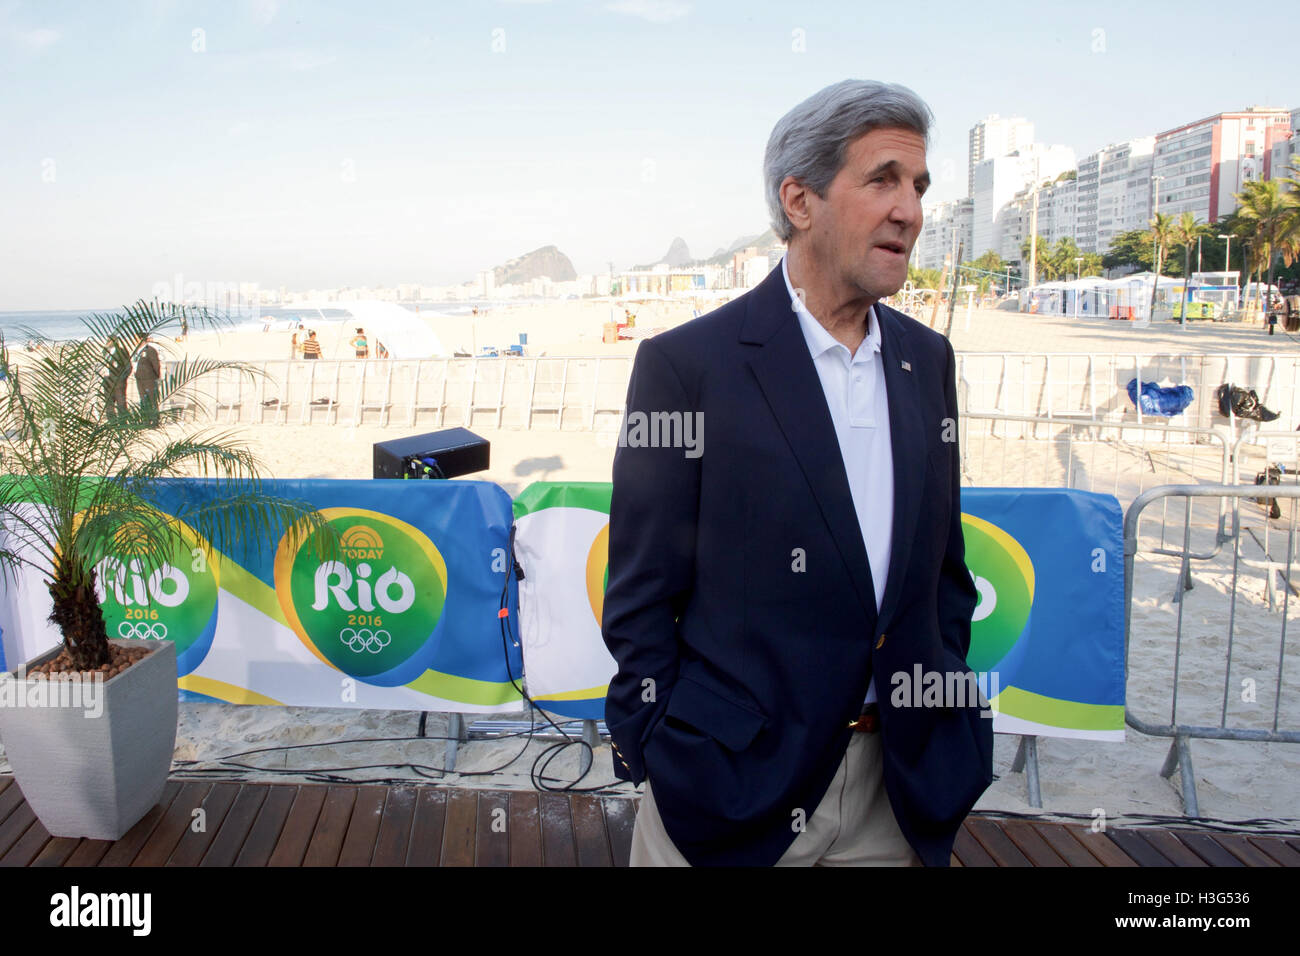 U.S. Secretary of State John Kerry stands along the Copacobana beach in Rio de Janeiro, Brazil, on August 6, 2016, before conducting an interview with the NBC News &quot;Today&quot; program about the 2016 Summer Olympic Games. Stock Photo